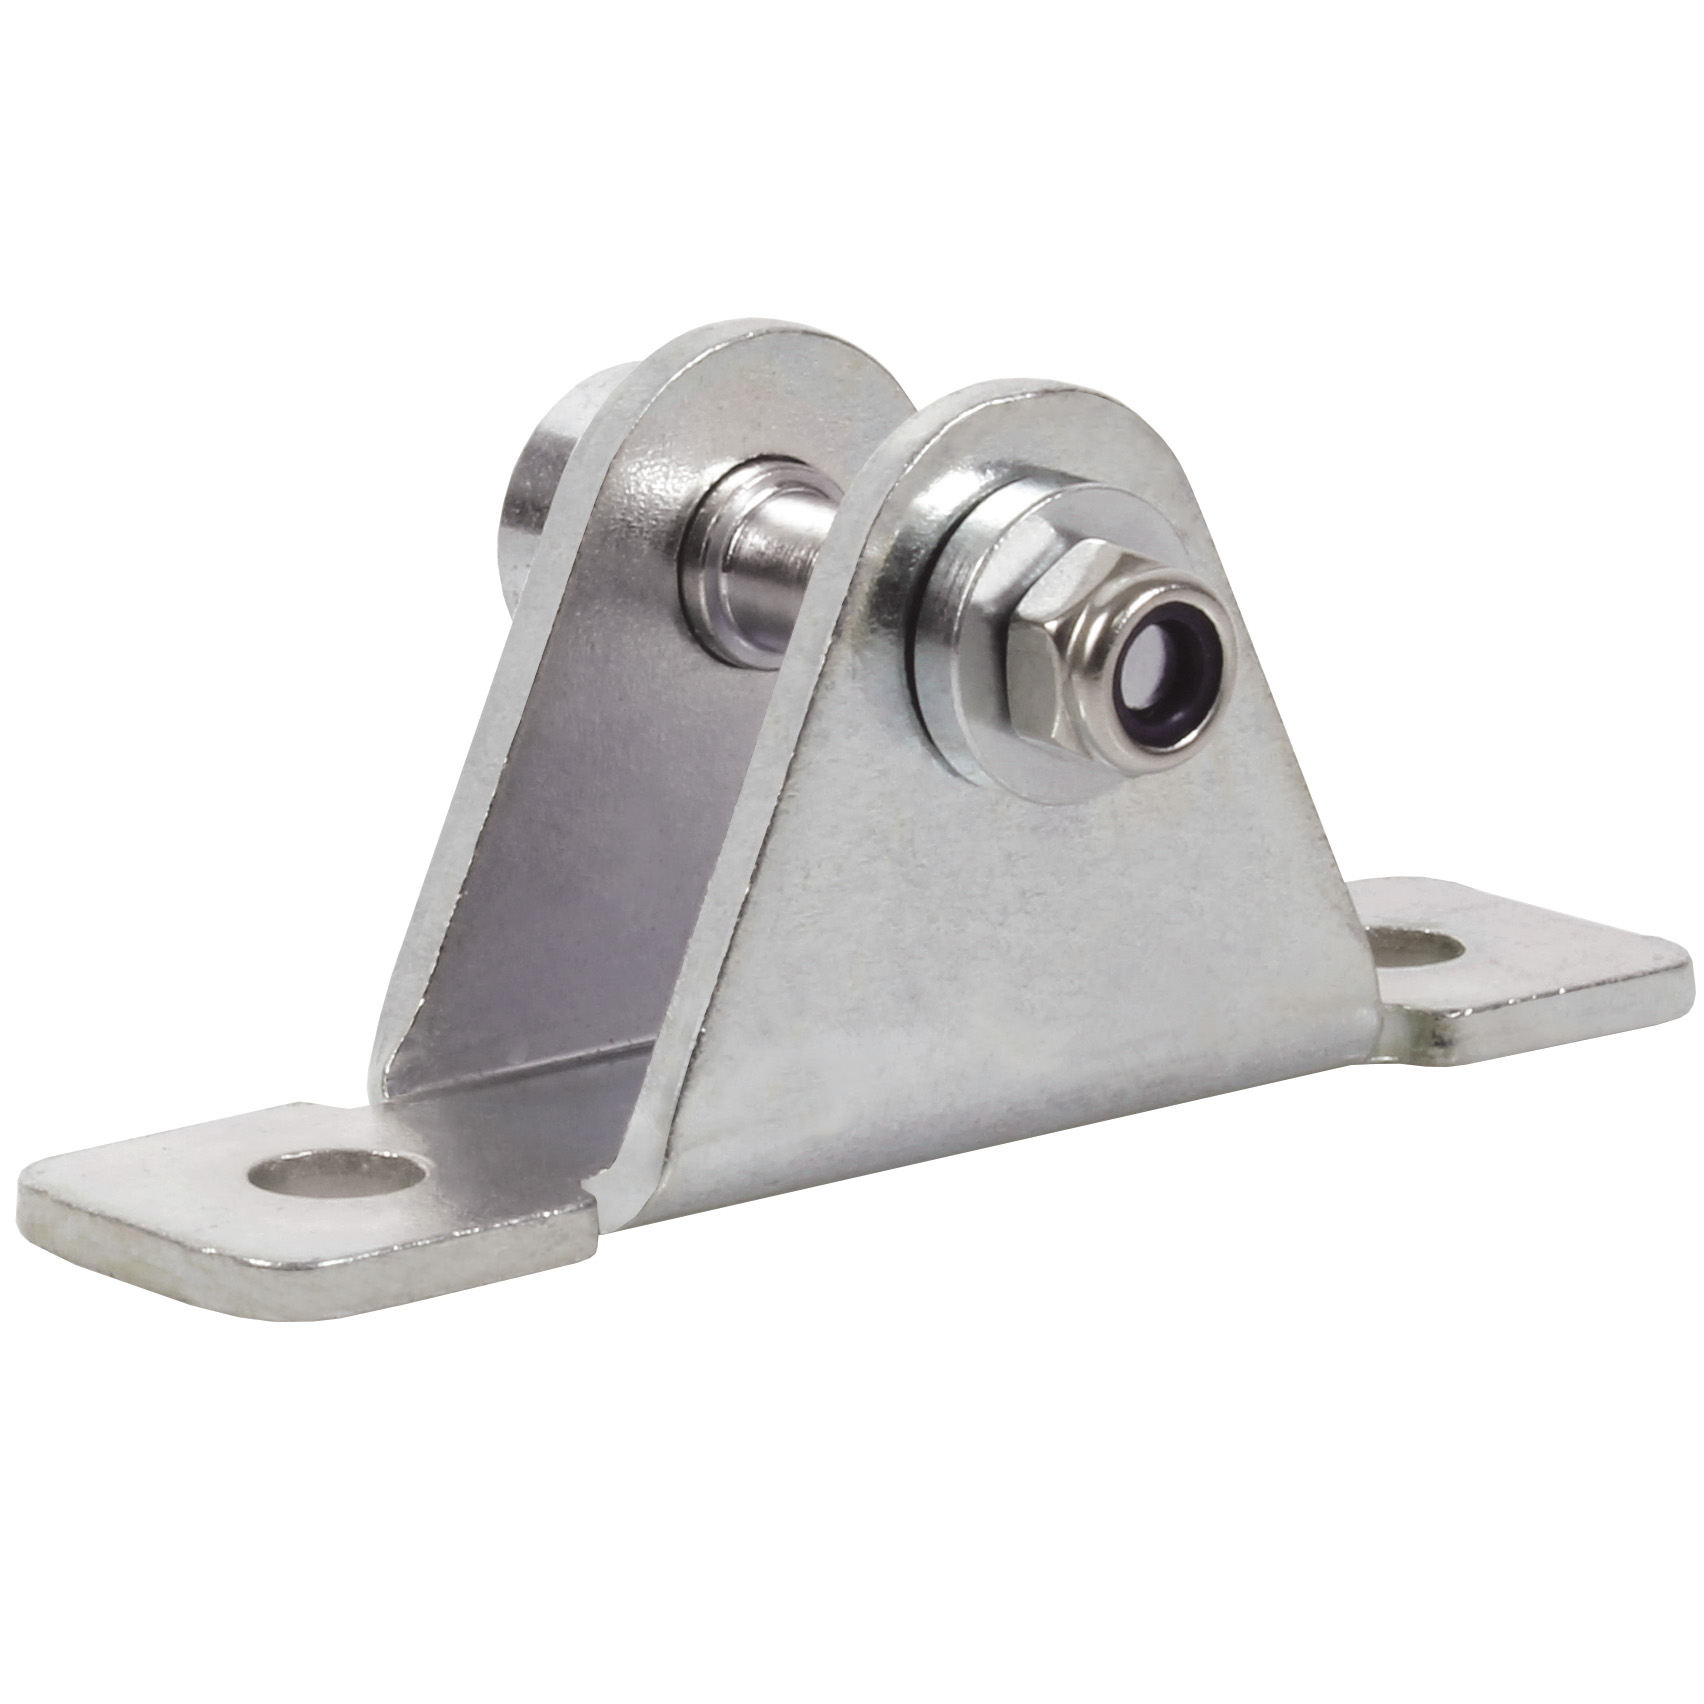 Straight clevis - Straight clevis for use with a male clevis - Stainless steel - 